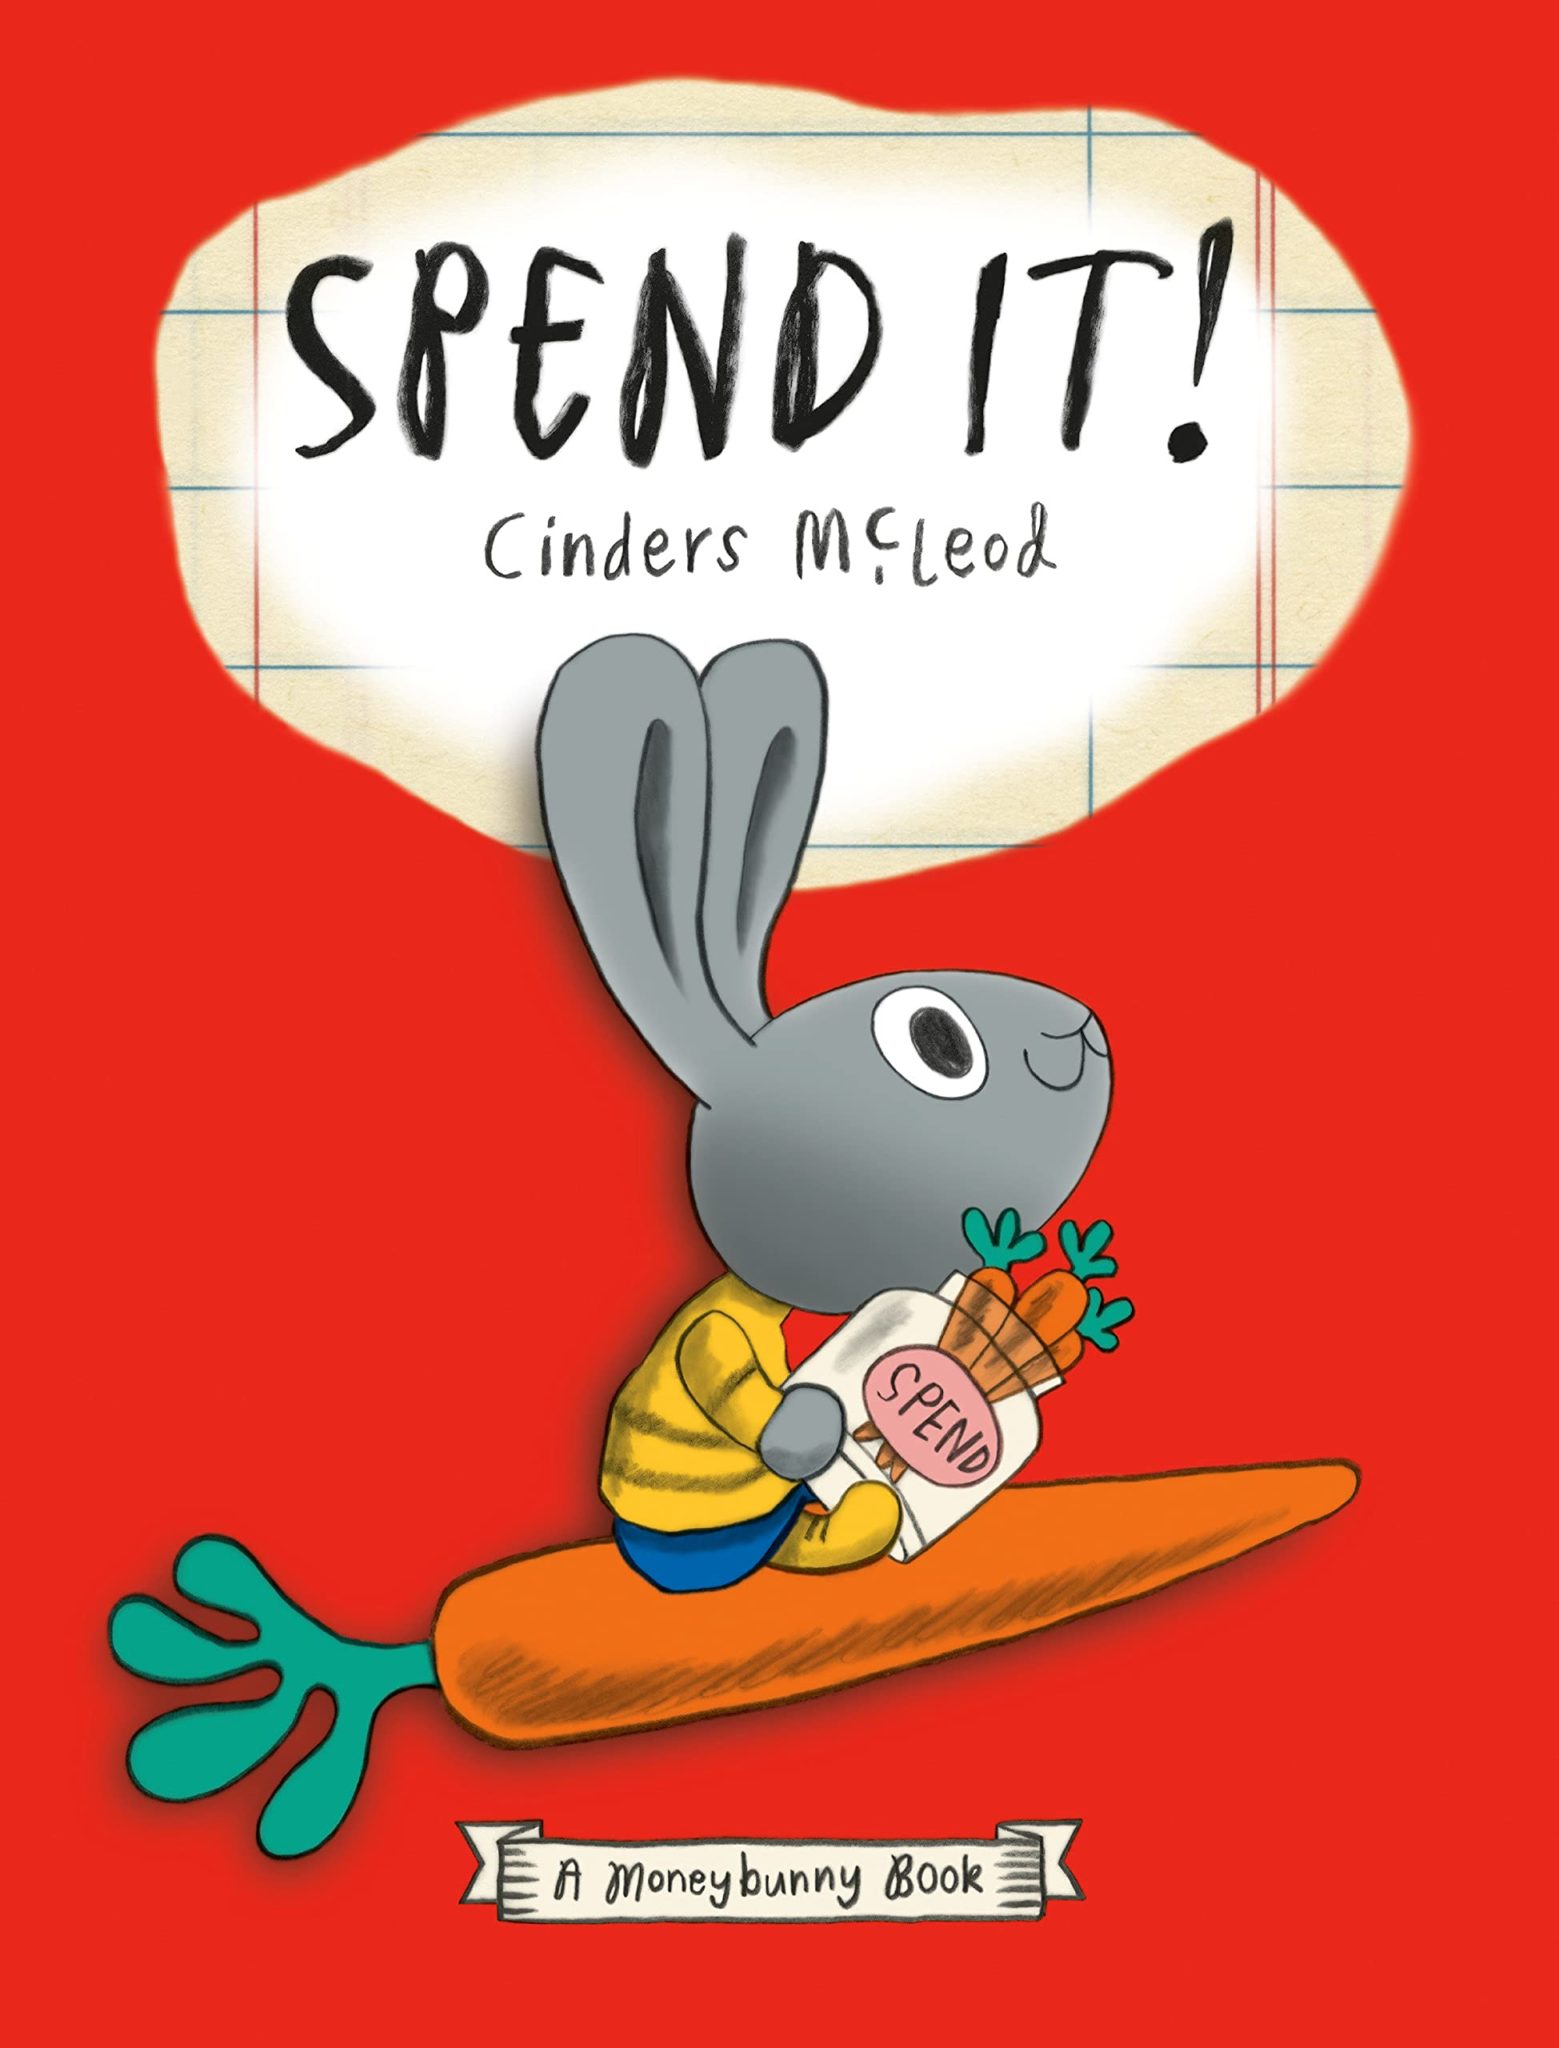 The cover of the picture book "Spend It!" features a smiling cartoon rabbit riding a large carrot across the cover. He is holding a jar of three carrots marked "spend."